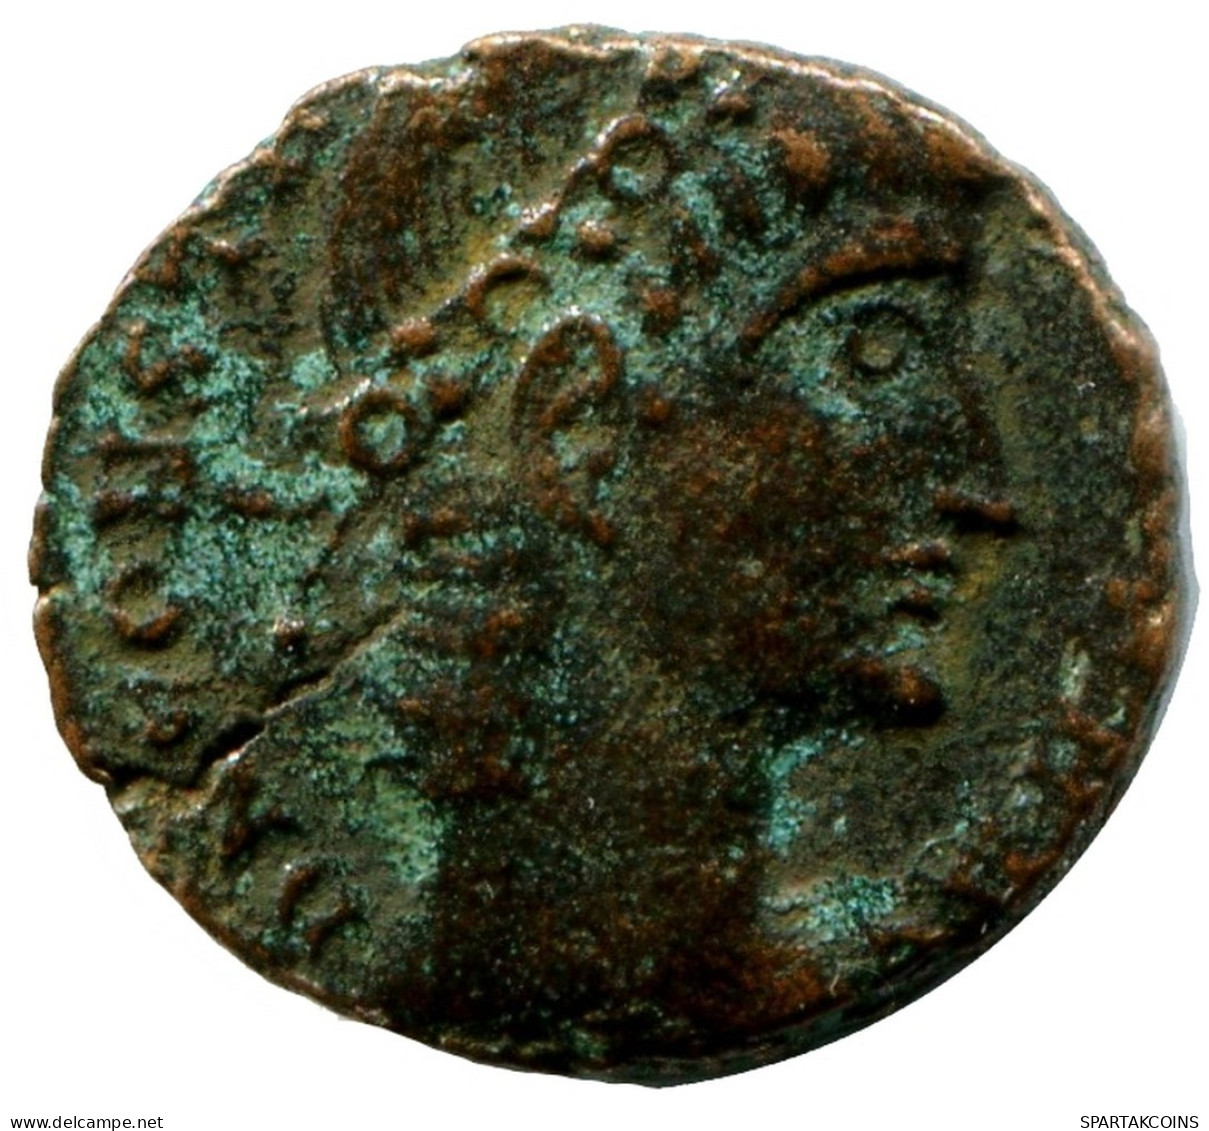 CONSTANS MINTED IN HERACLEA FOUND IN IHNASYAH HOARD EGYPT #ANC11556.14.D.A - L'Empire Chrétien (307 à 363)